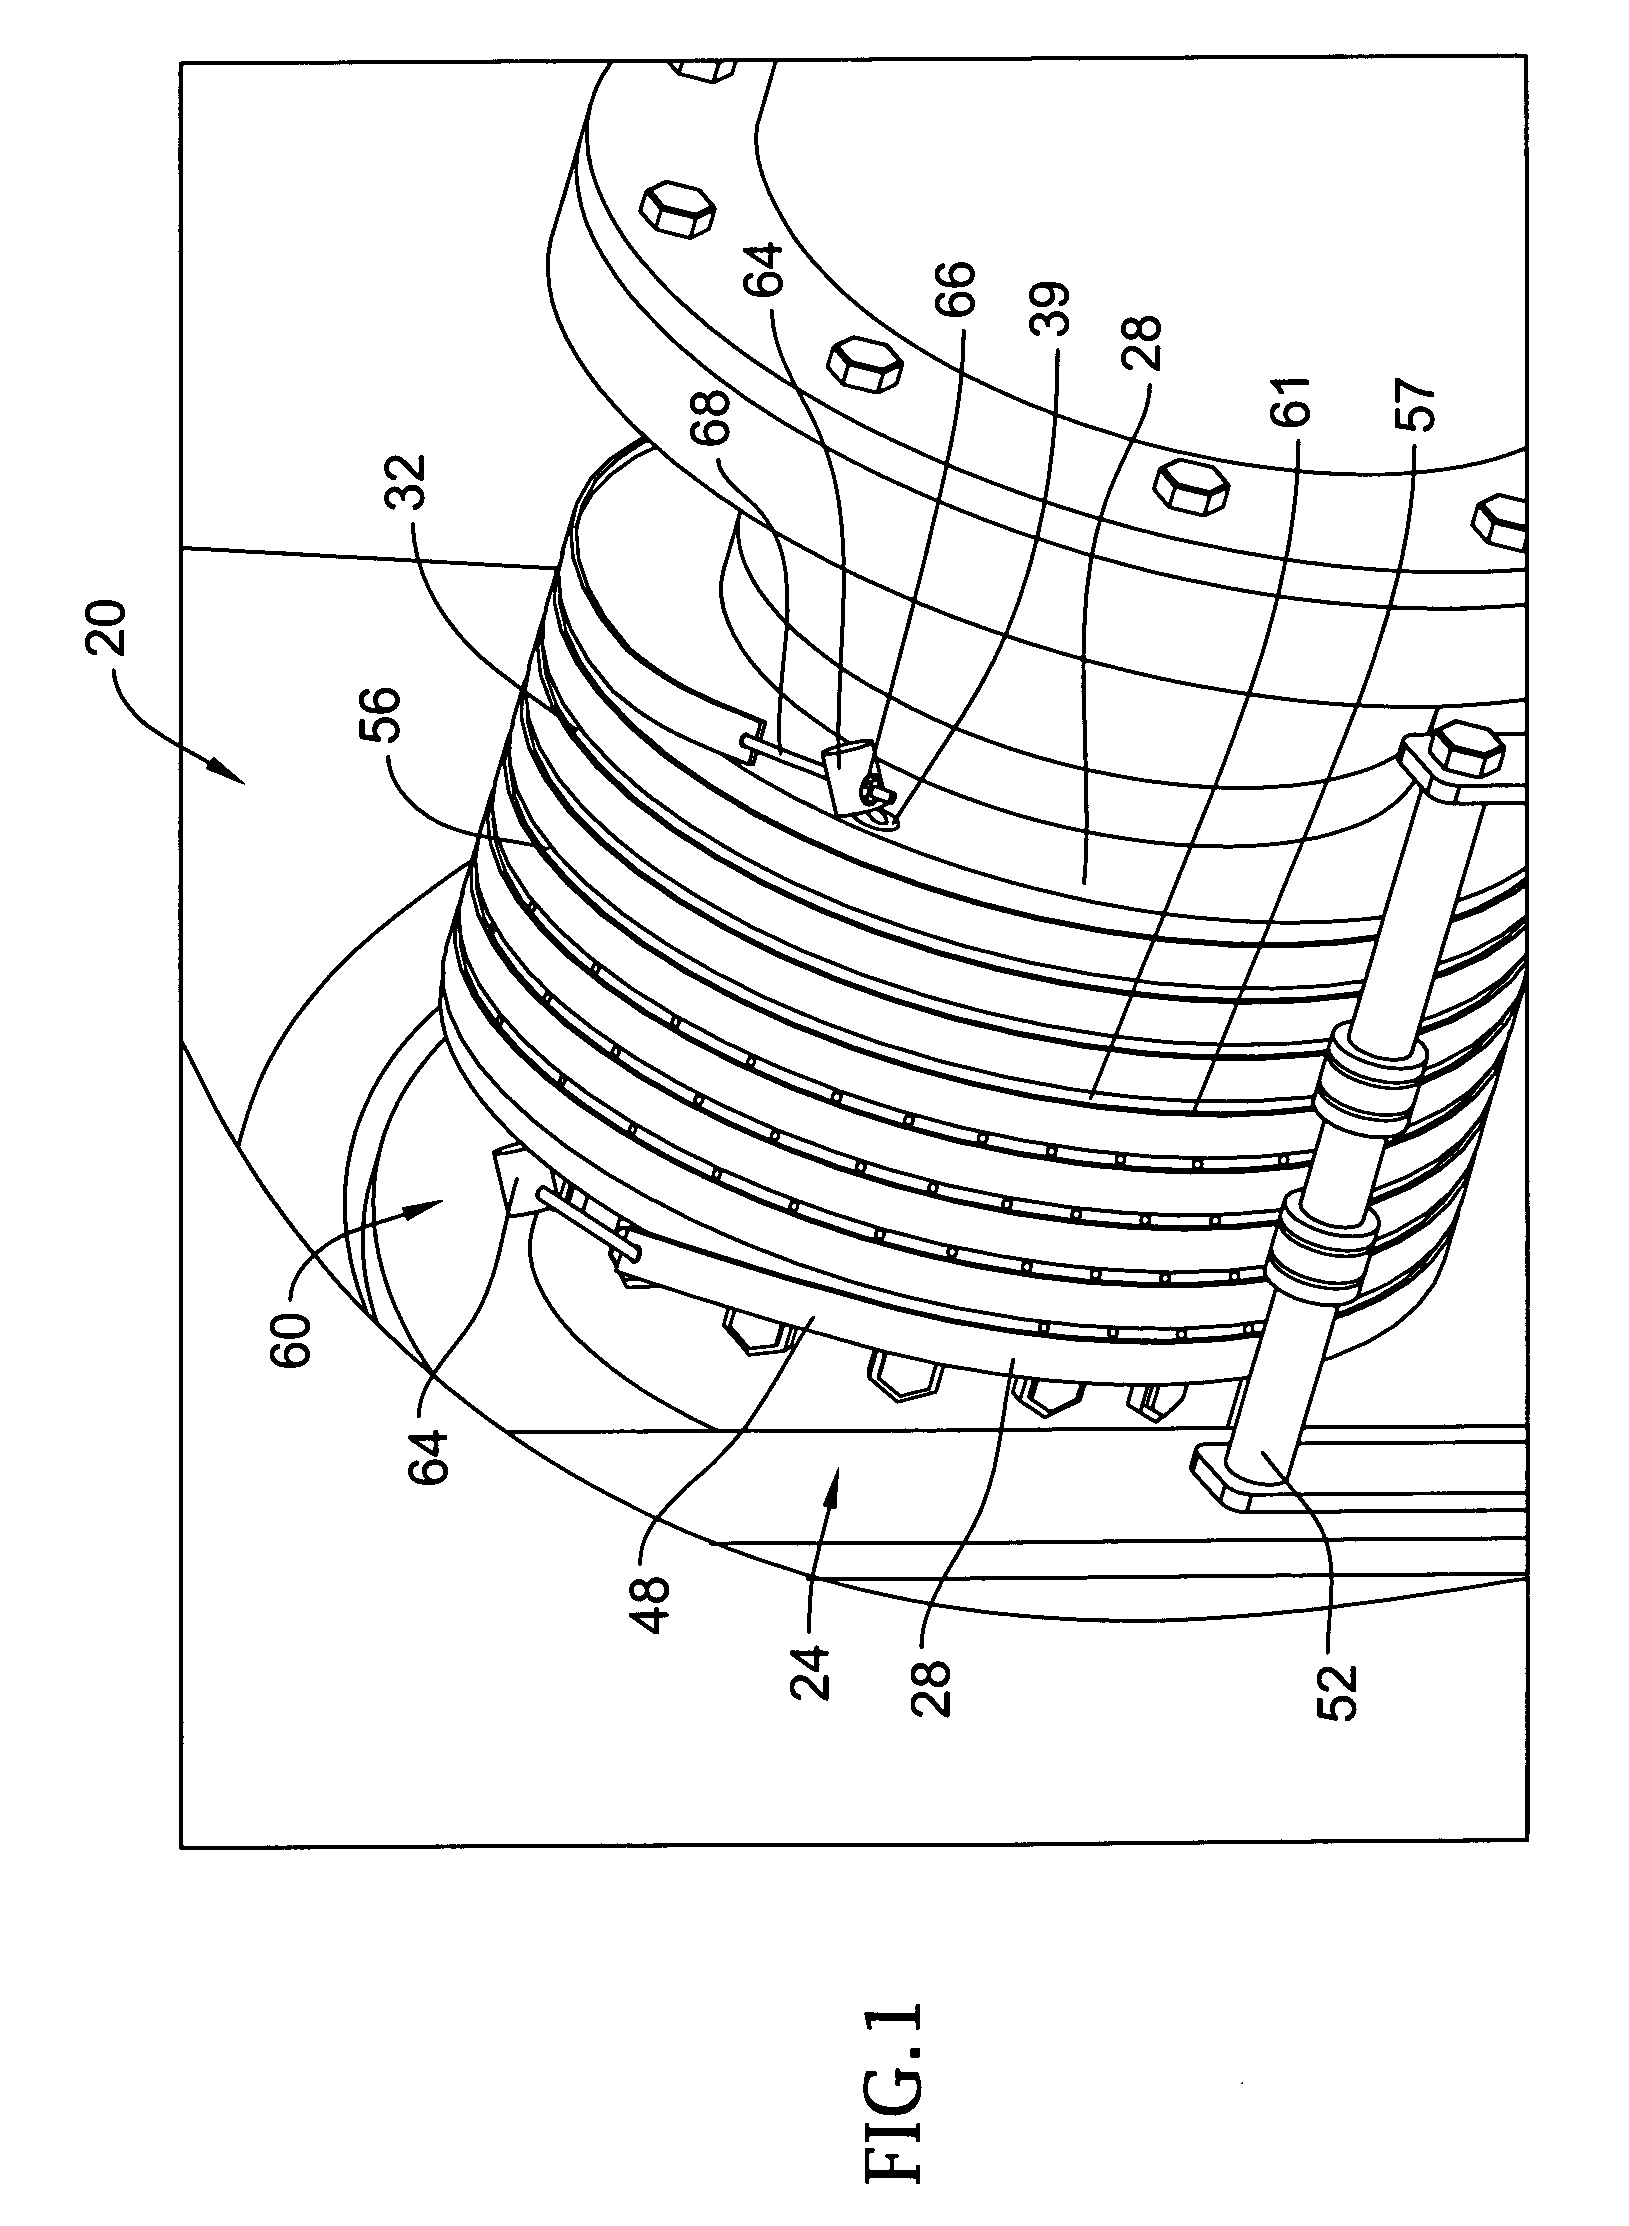 Method and apparatus for creating a groove in a collector ring of an electrical device